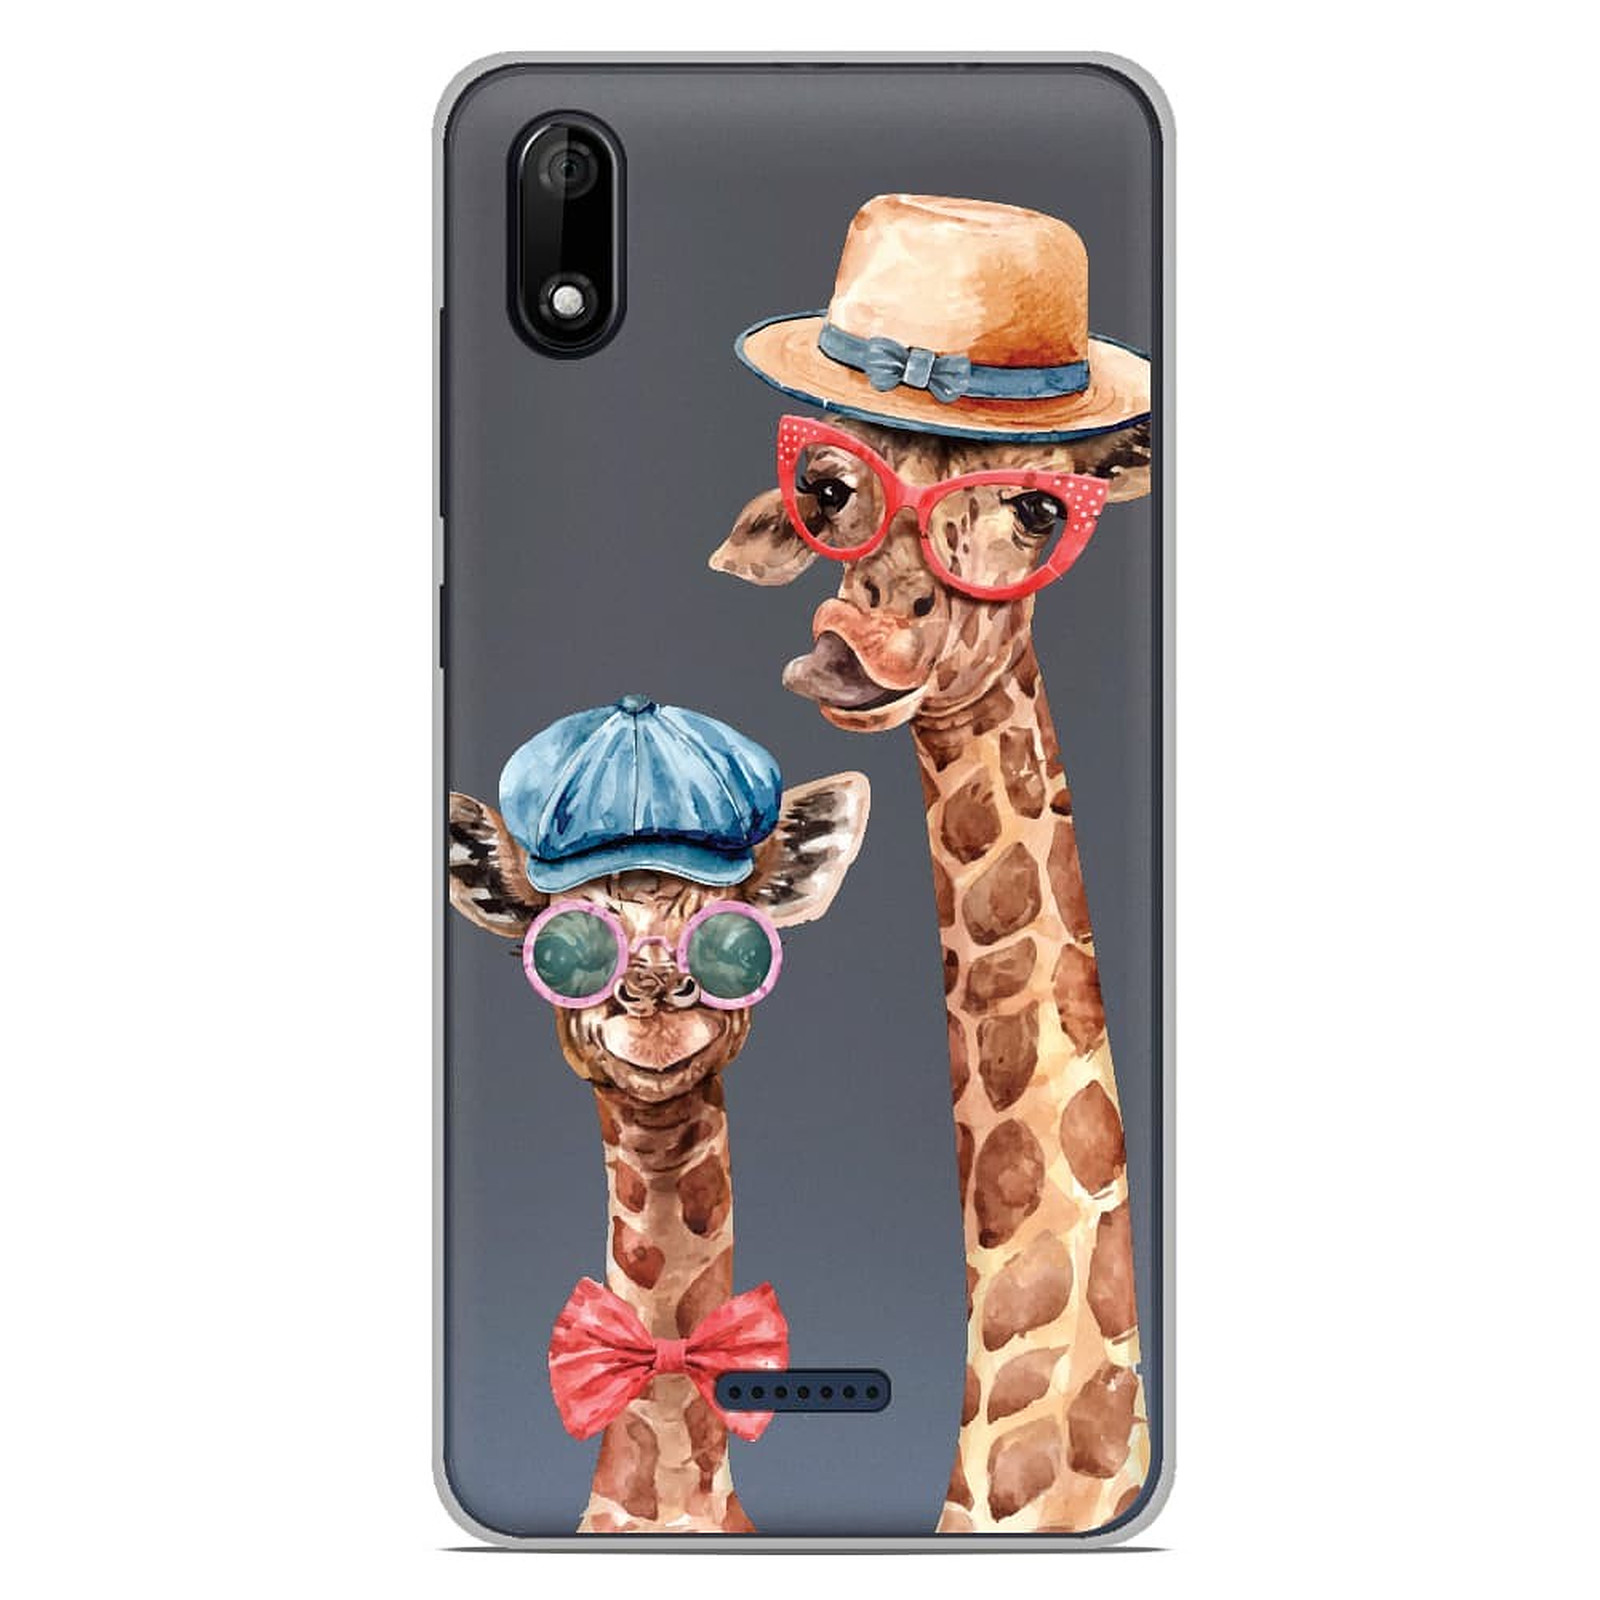 1001 Coques Coque silicone gel Wiko Y80 motif Funny Girafe - Coque telephone 1001Coques